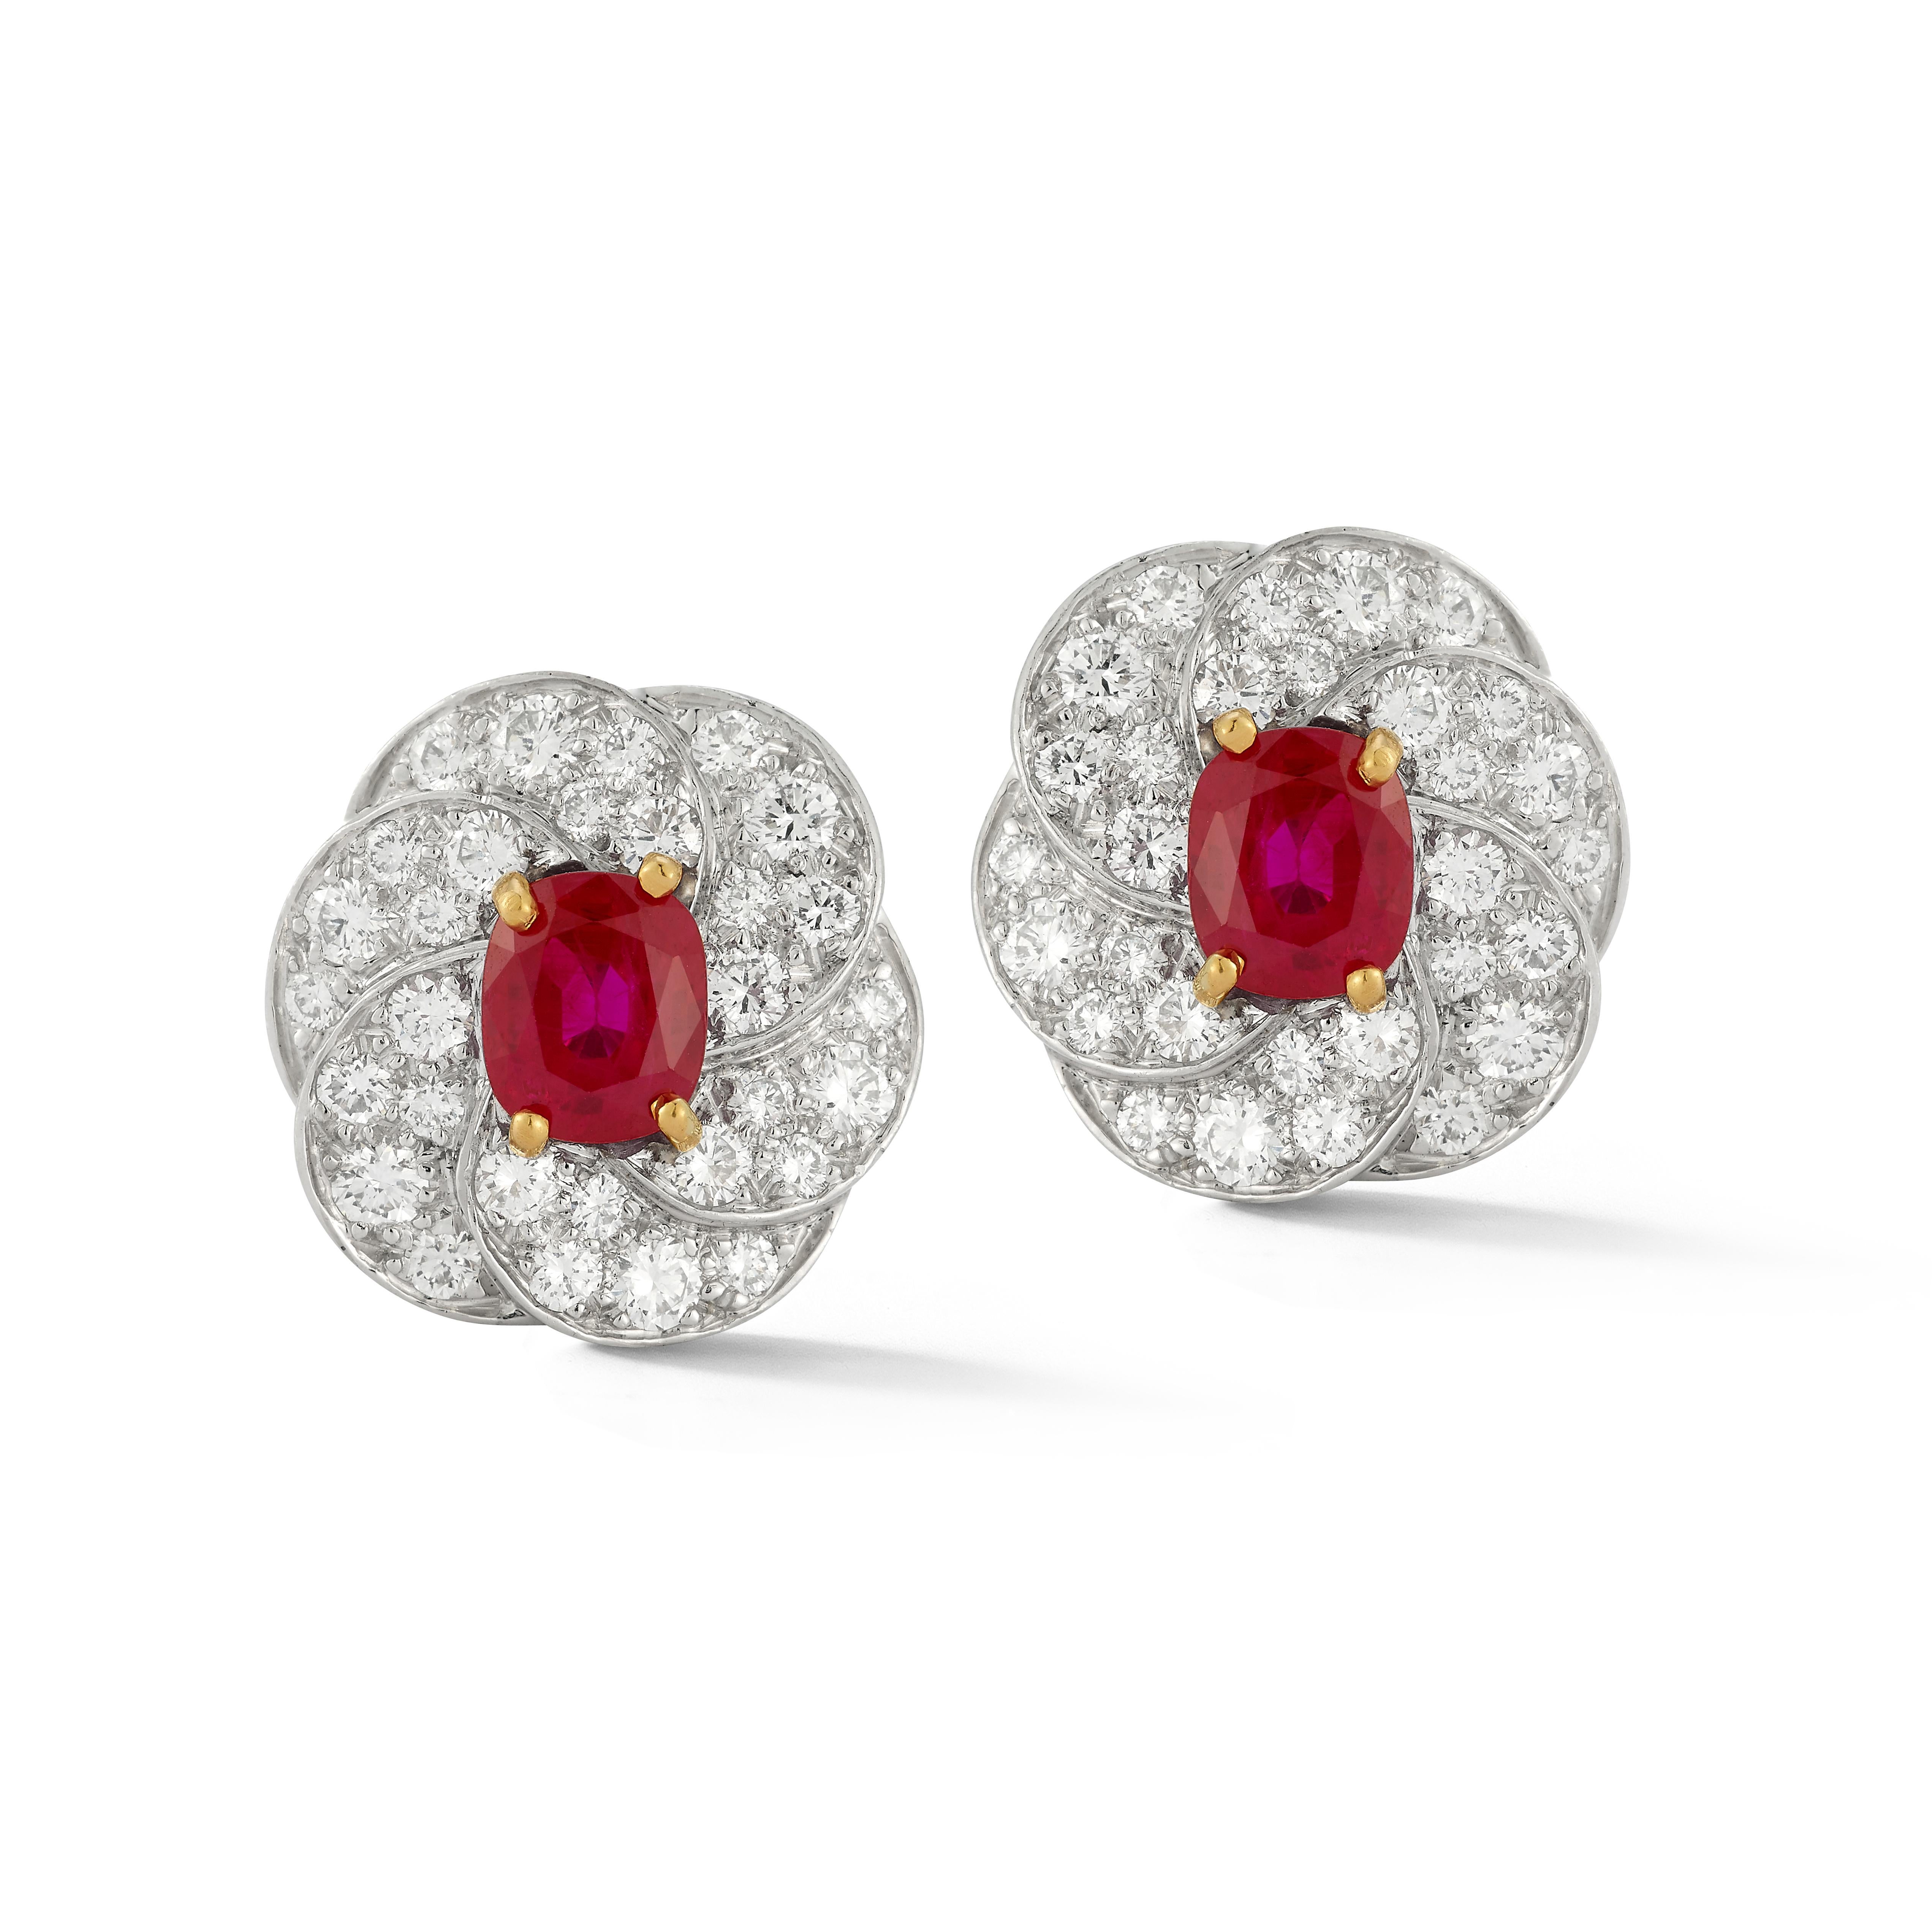 Oscar Heyman Brothers Certified Burmese Ruby Earrings

A pair of platinum and 18 karat gold earrings set with 2 oval cut Burmese rubies and 60 round cut diamonds

Total Approximate Ruby Weight: 2.05 carats

Accompanied by an AGL report stating the